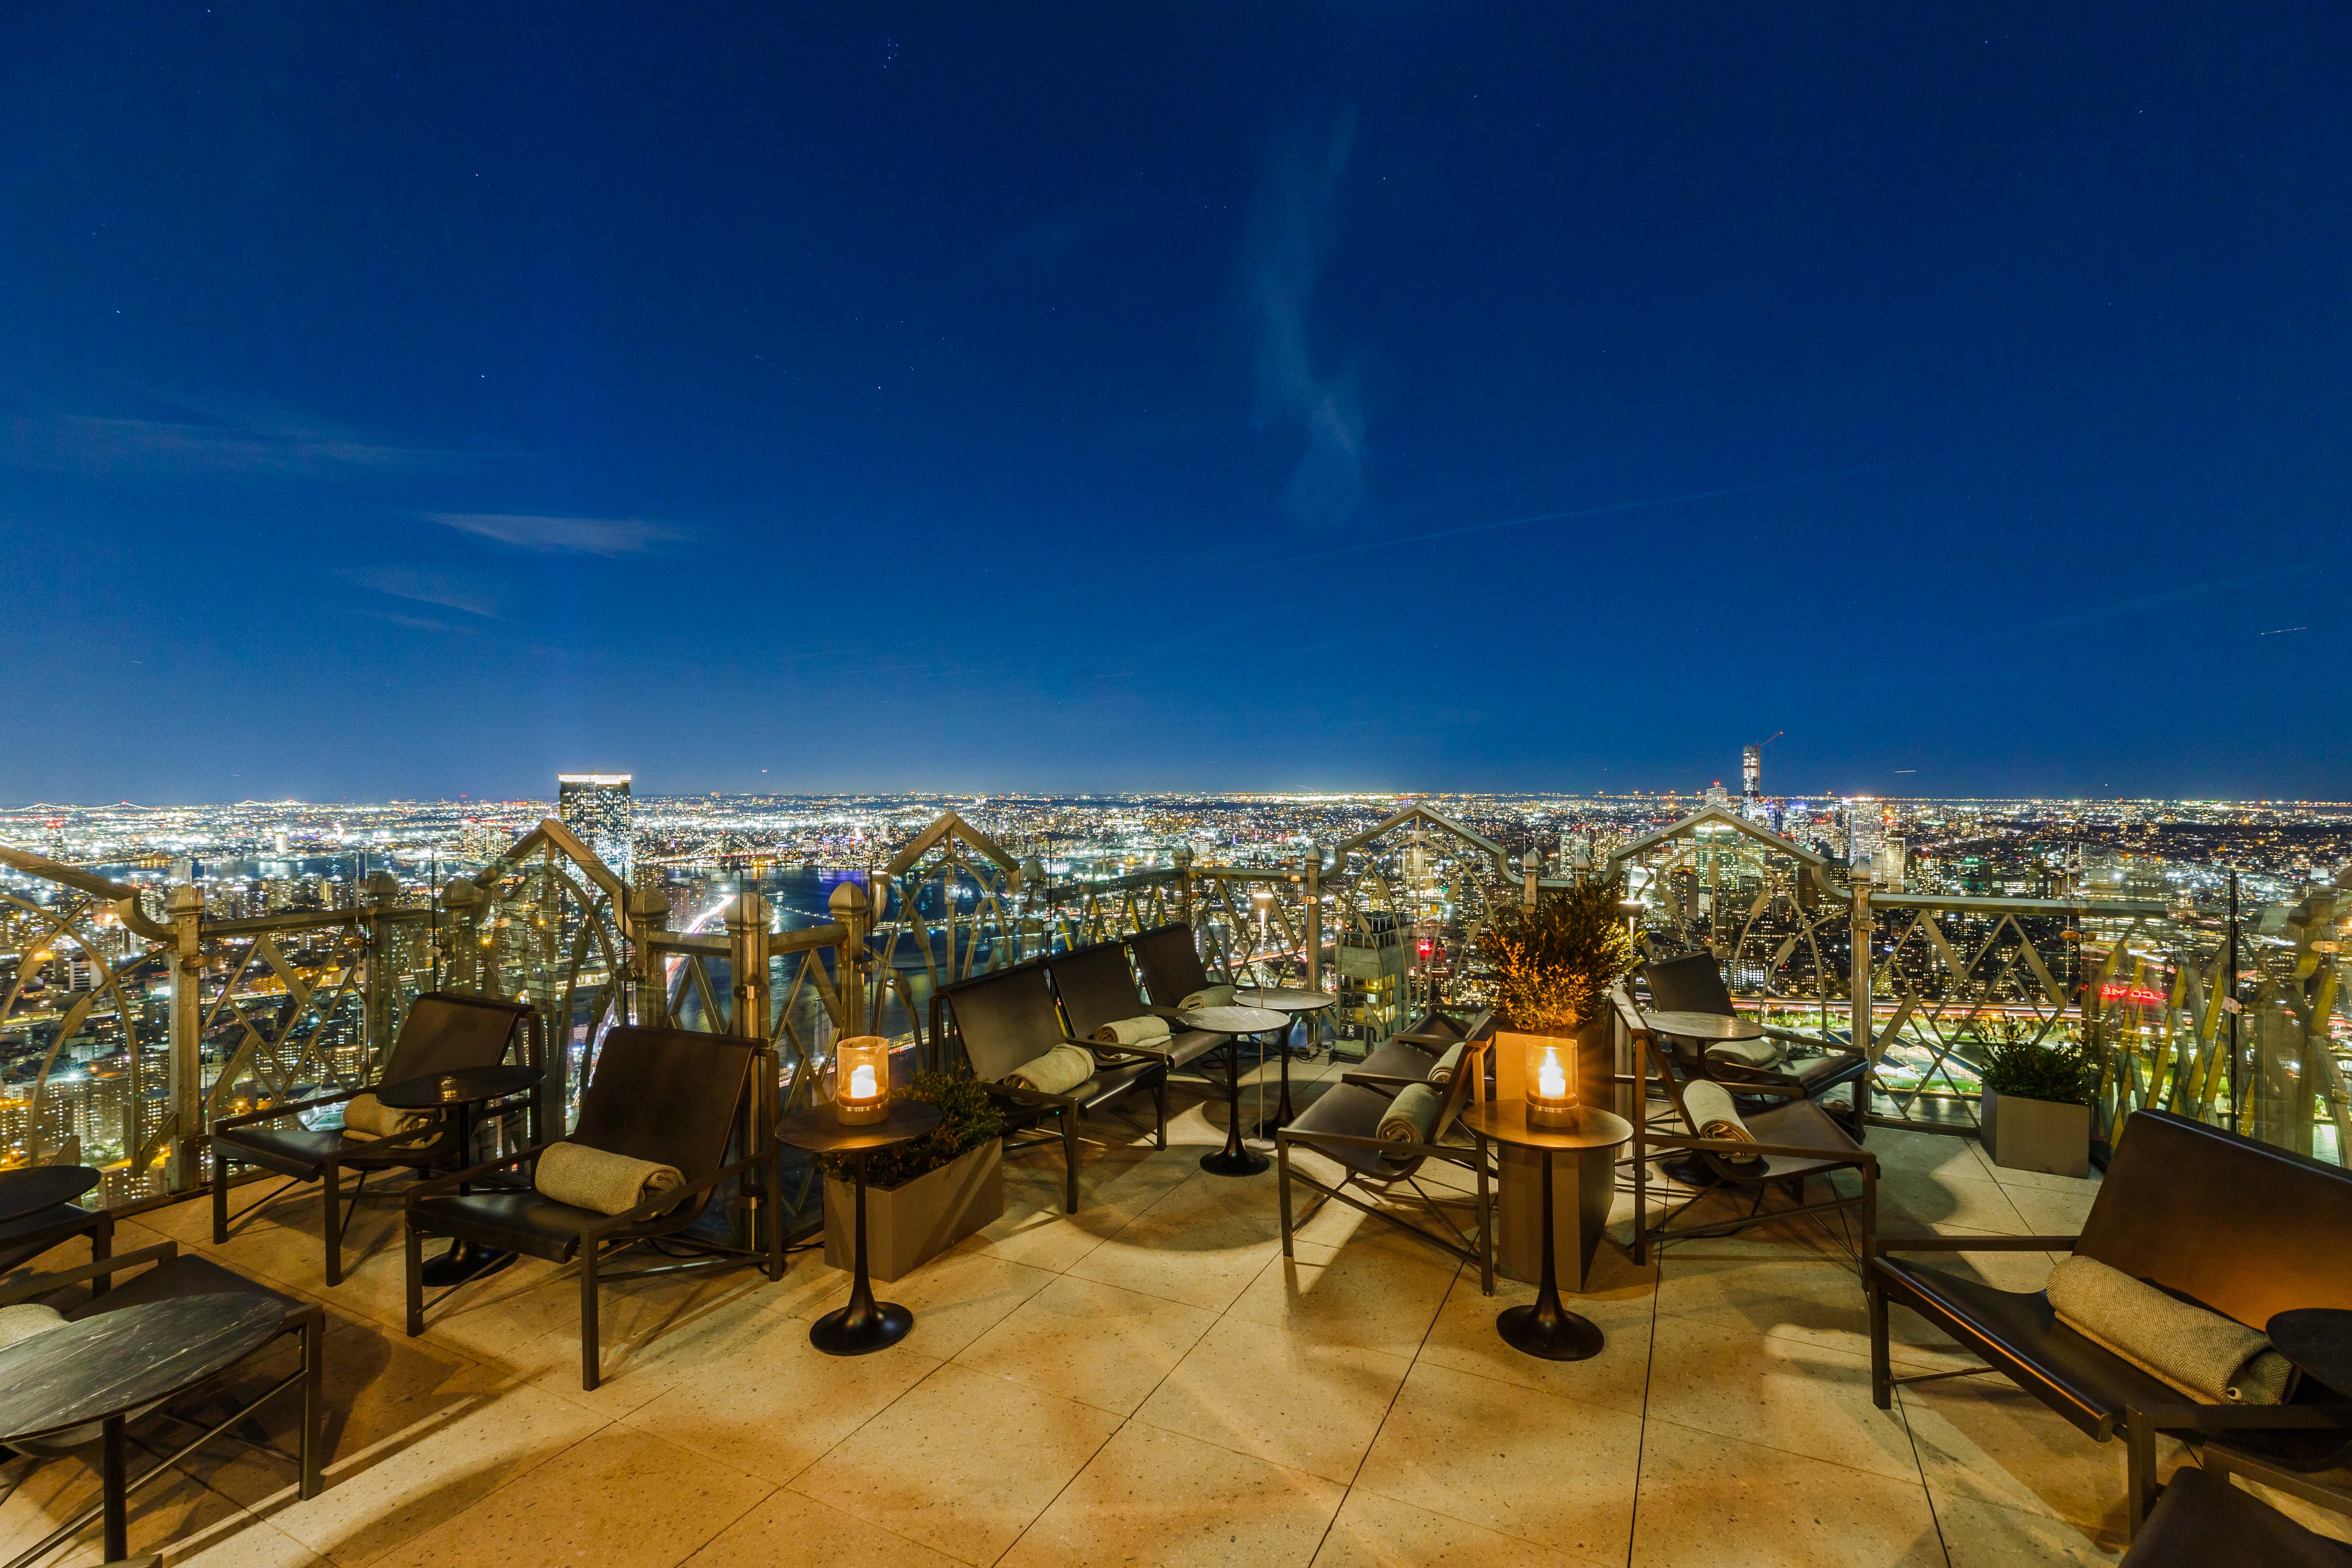 A Financial District terrace 63 floors up overlooks the Brooklyn skyline at night